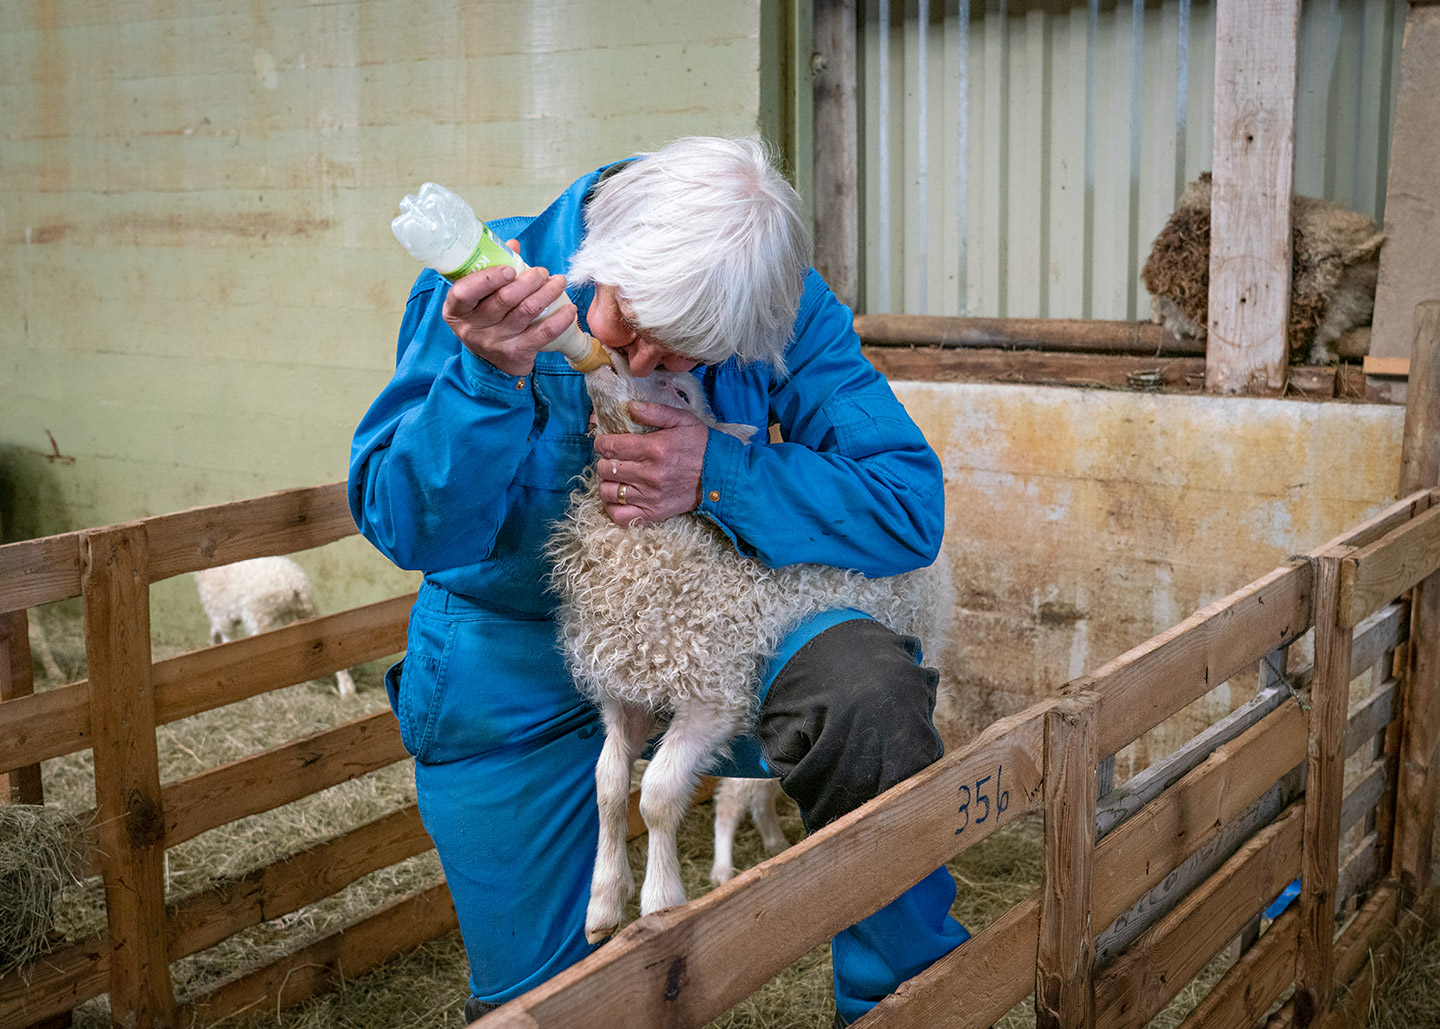 A farmer holding a new born lamb and feeding it milk from a bottle.